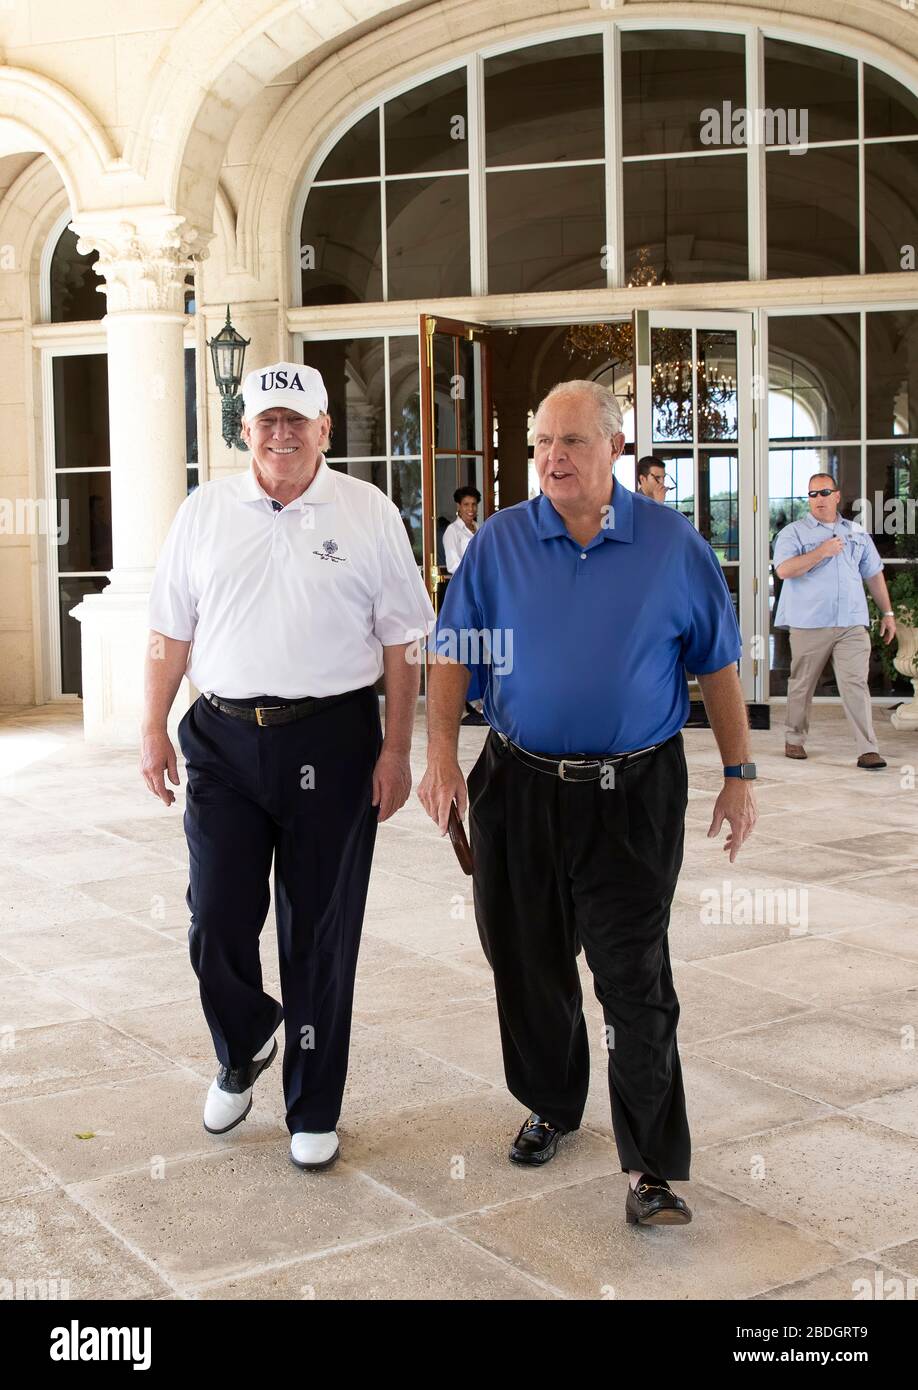 President Donald J. Trump and radio commentator Rush Limbaugh pose for a photo Friday, April 19, 2019, during their round of golf at the Trump International Golf Club in West Palm Beach, Fla. Stock Photo